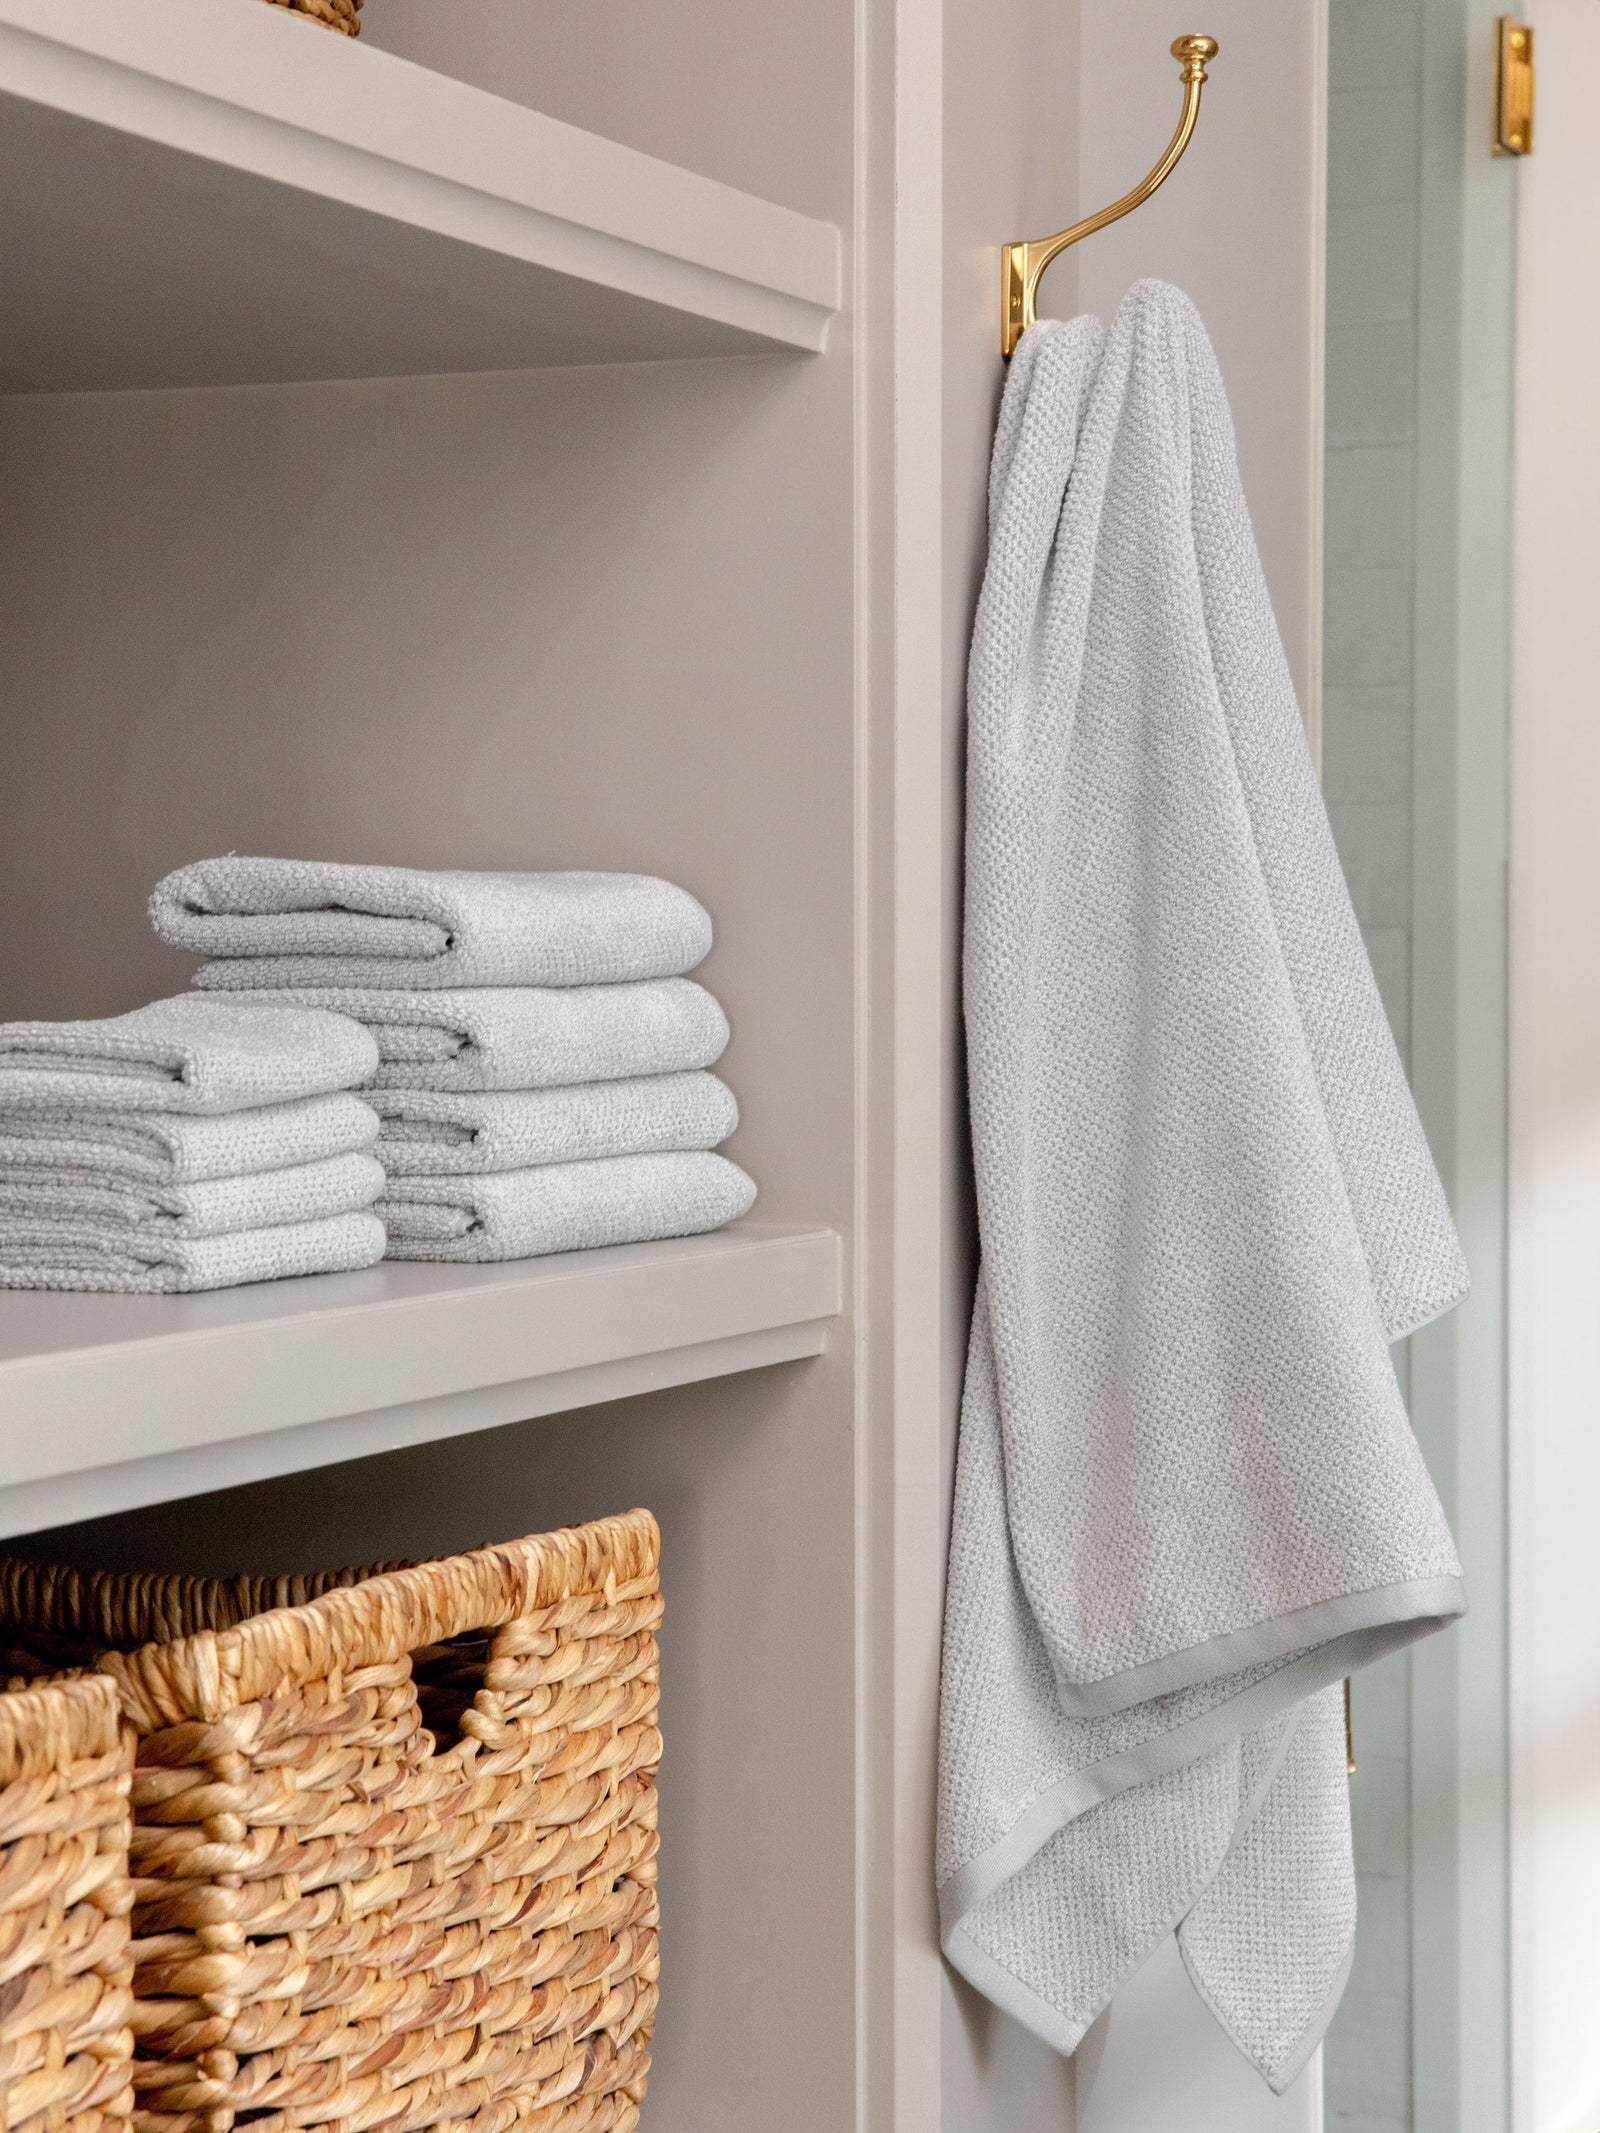 Nantucket Bath Sheets in the color Heathered Harbor Mist. Photo of Nantucket Bath Sheets taken as Nantucket hand towels, wash clothes, and bath towels are neatly placed on shelves in a bathroom. 